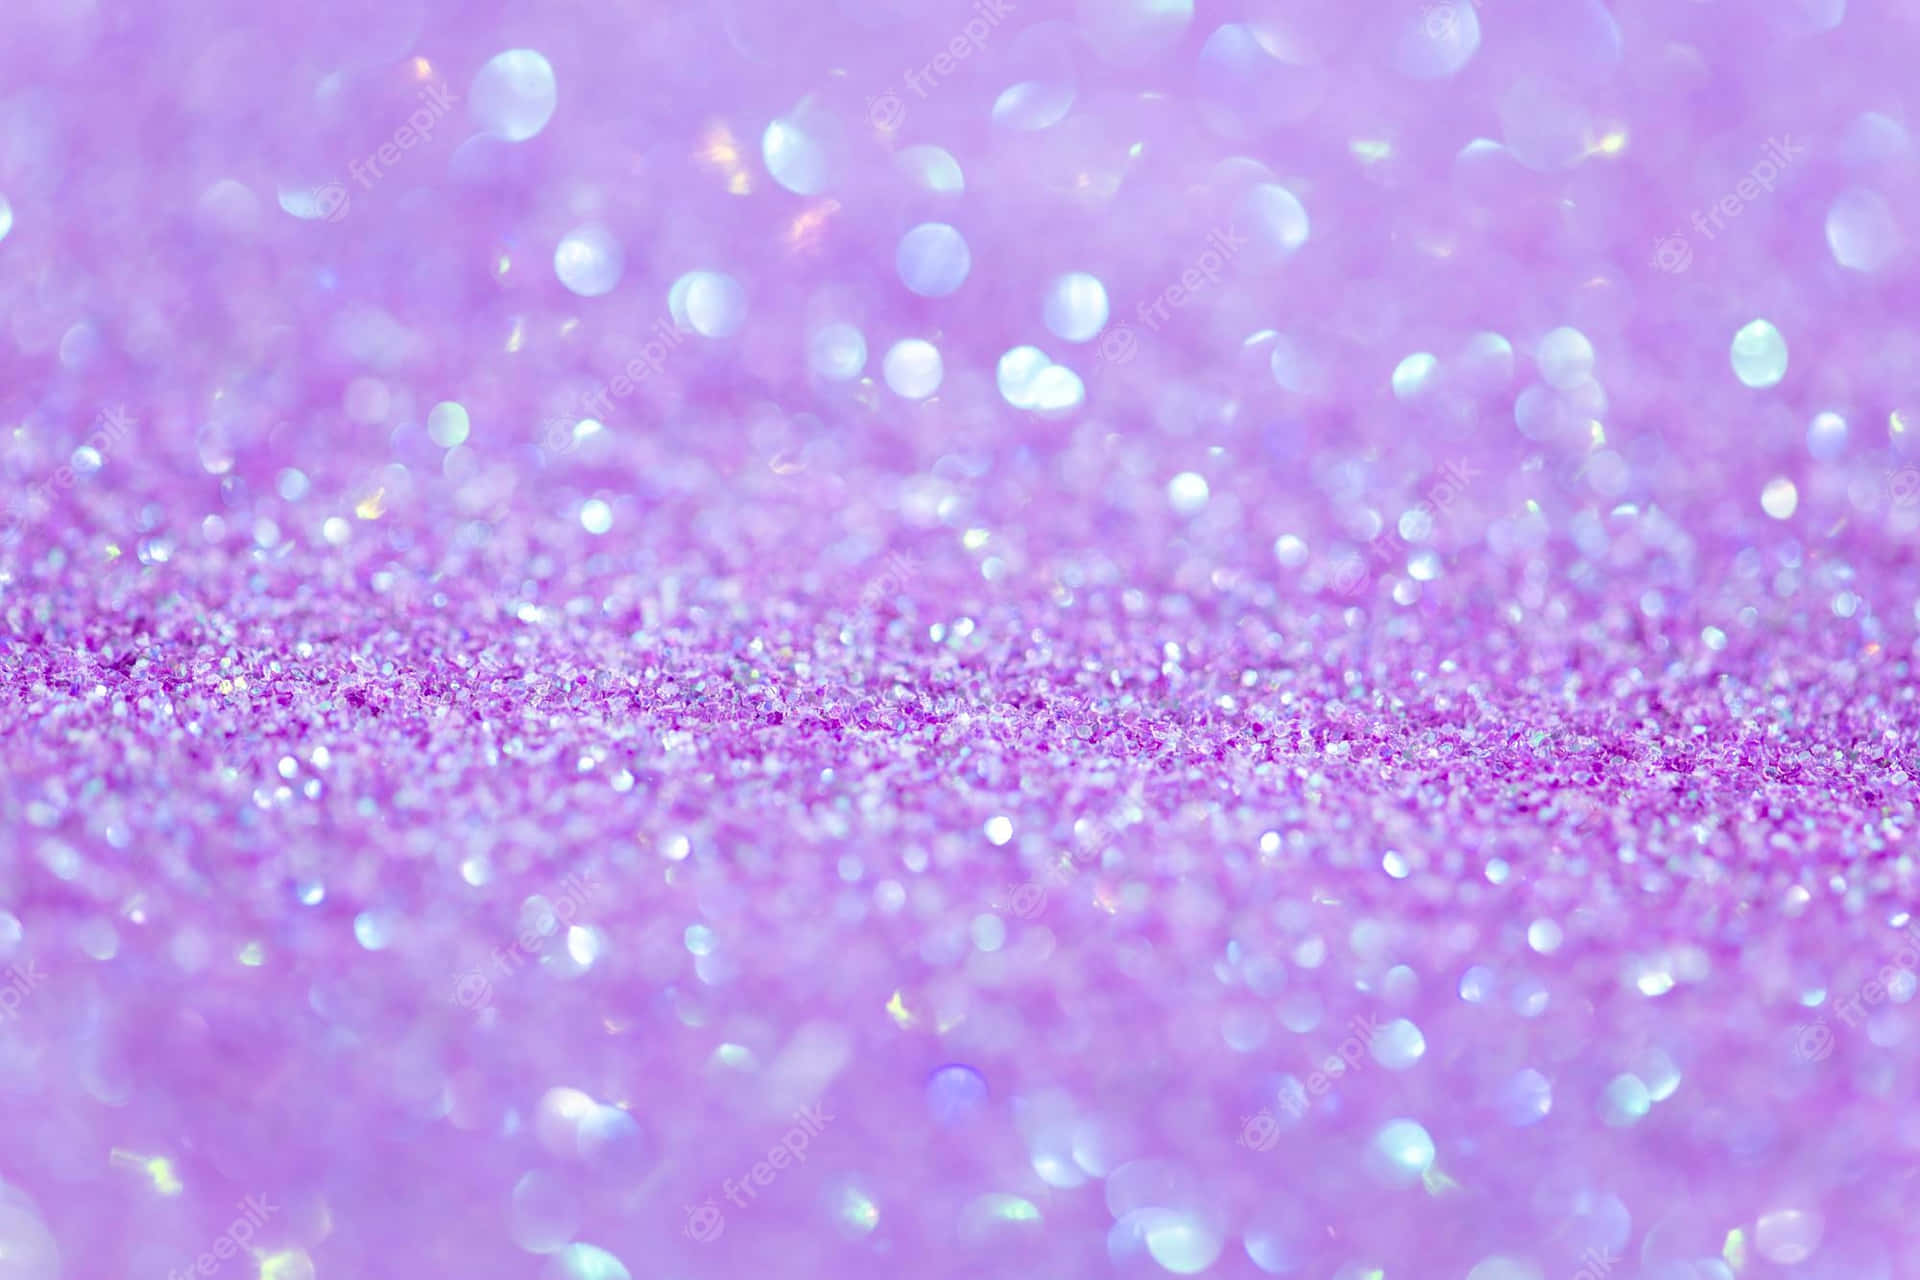 Purple Glitters Close Up Shot With Blurred Background